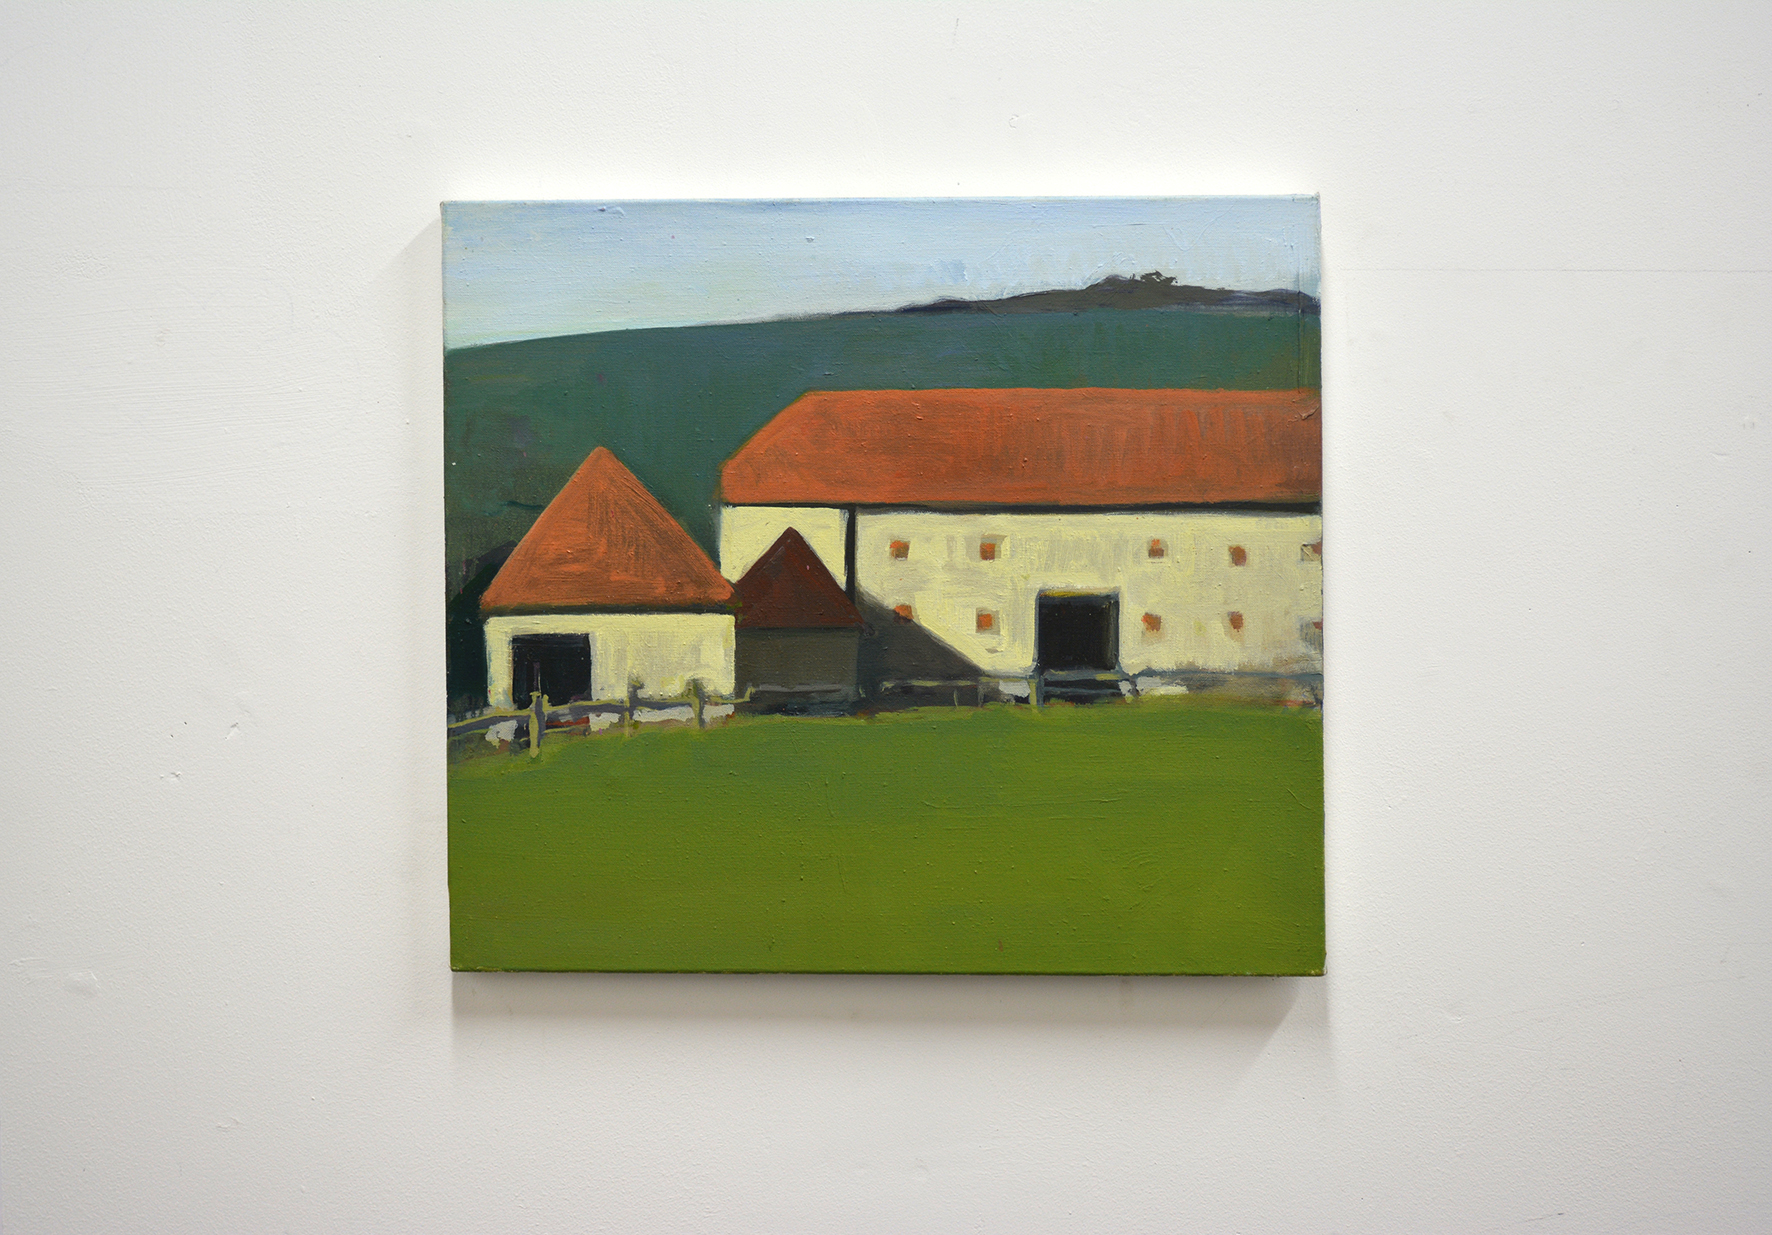 Tom Farthing, Barn, The Auction Collective